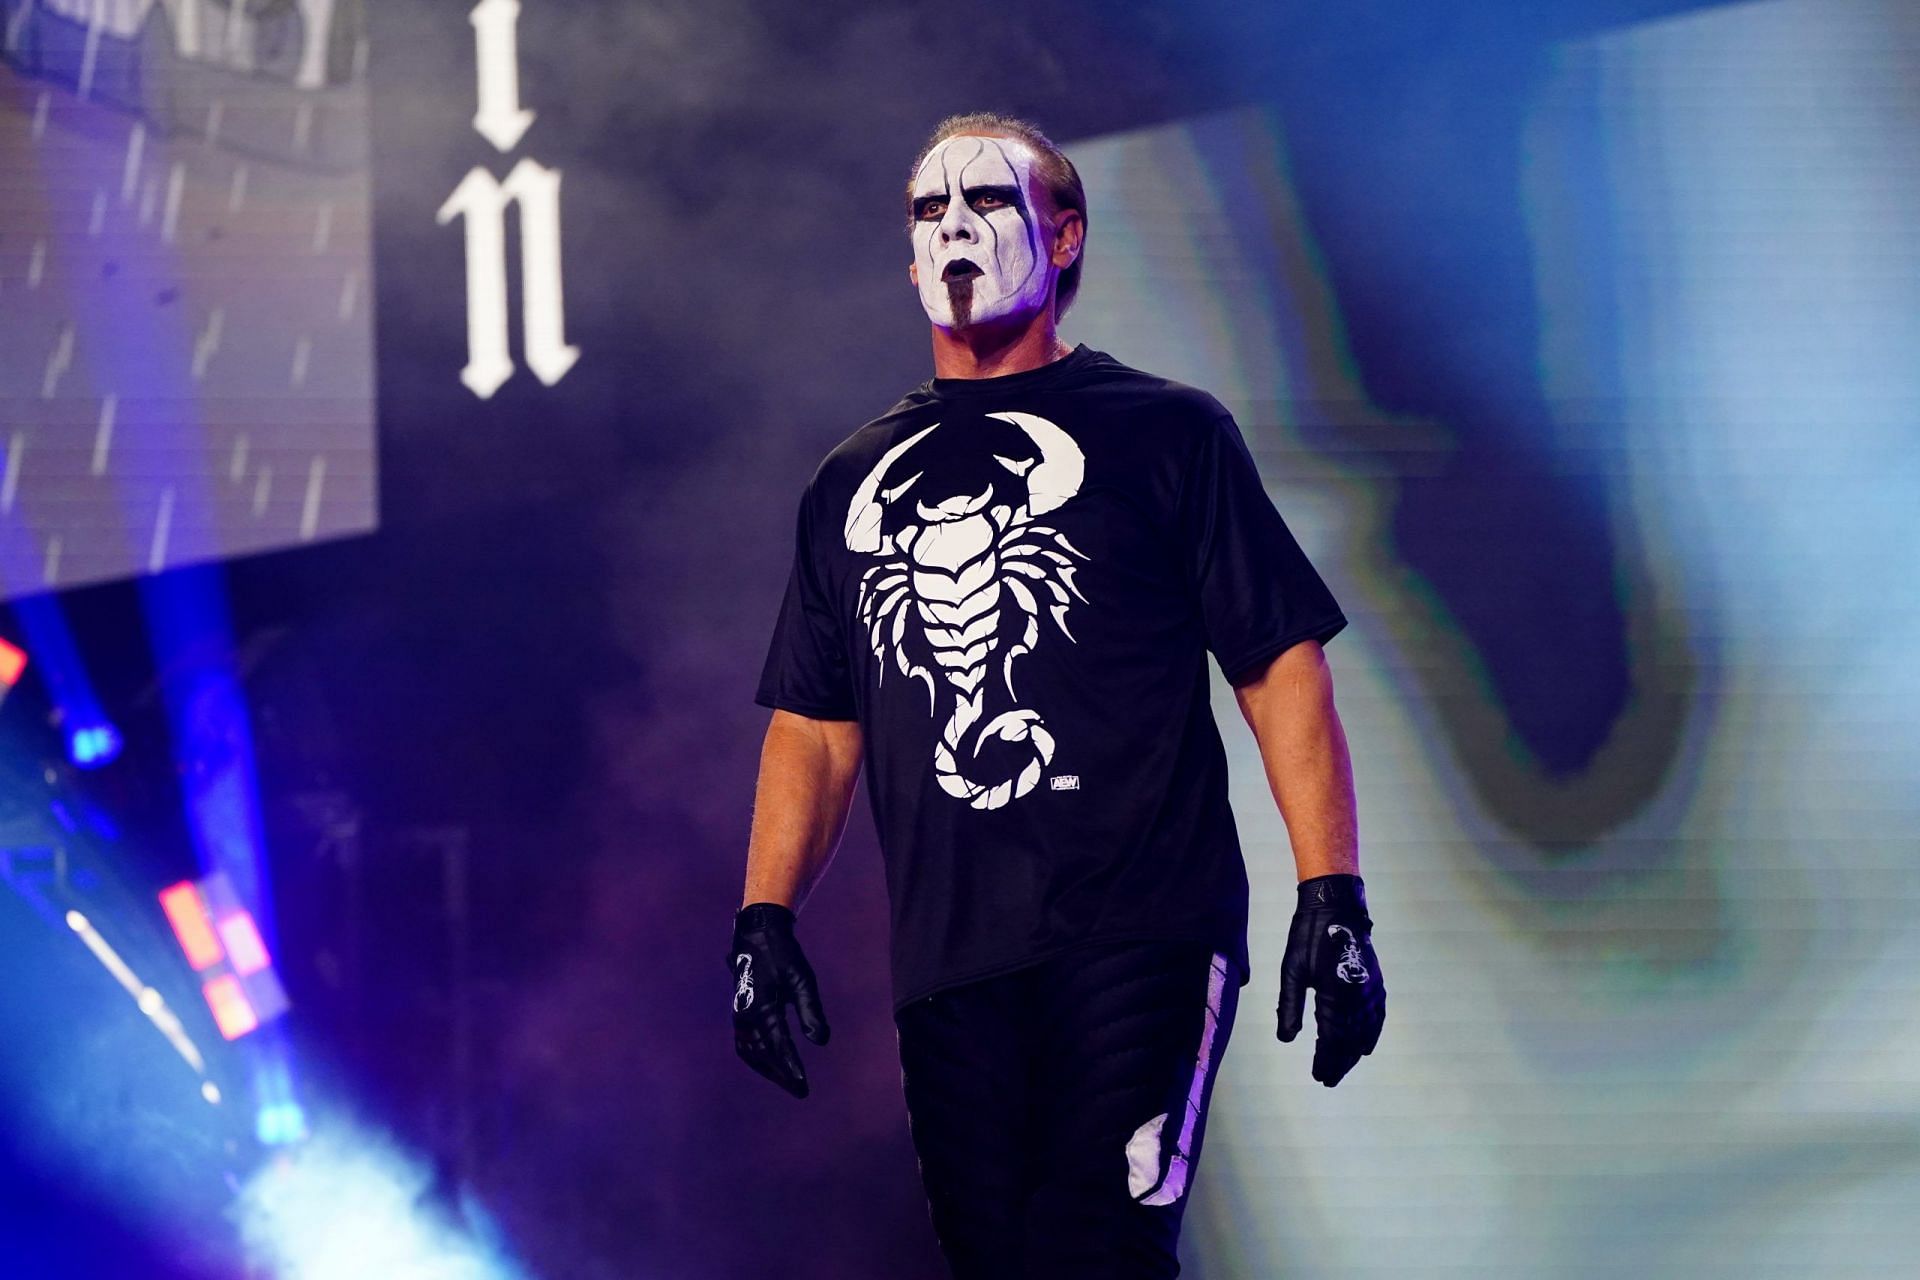 Sting signed with AEW after jumping ship from WWE